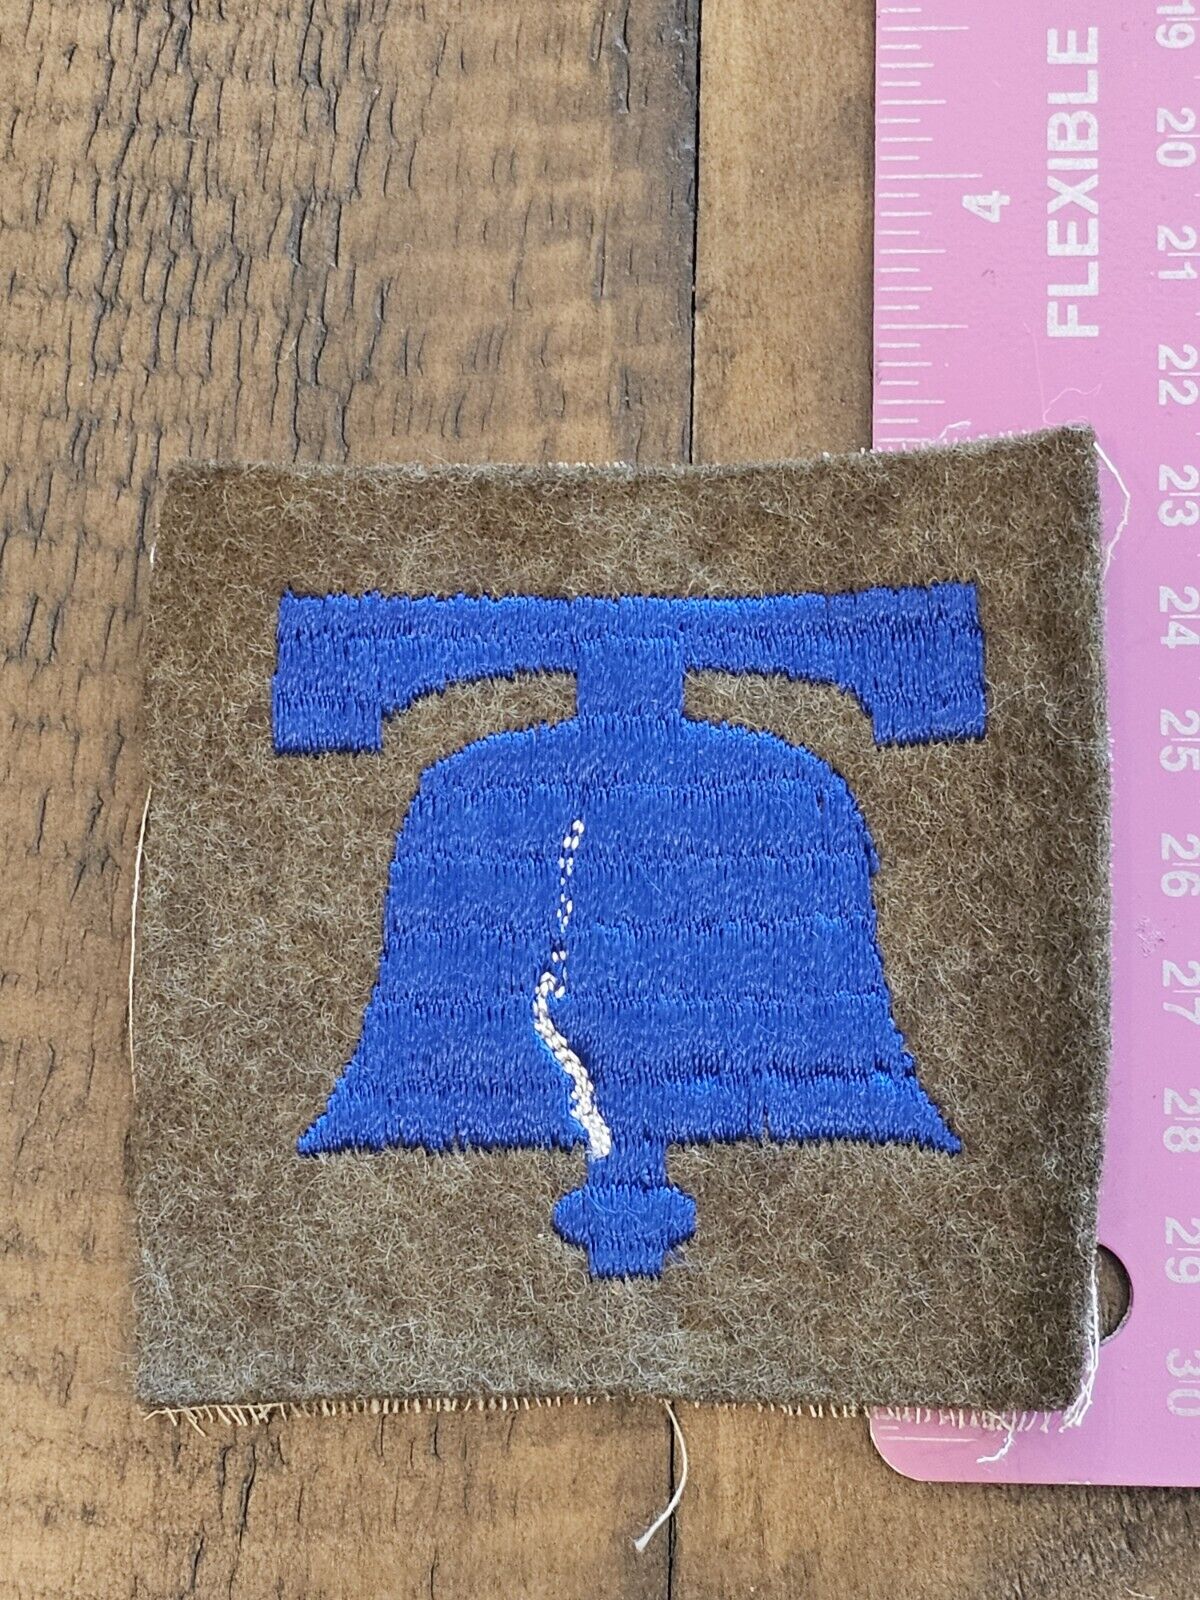 WWI US Army 76th Infantry Division Wool Patch L@@K